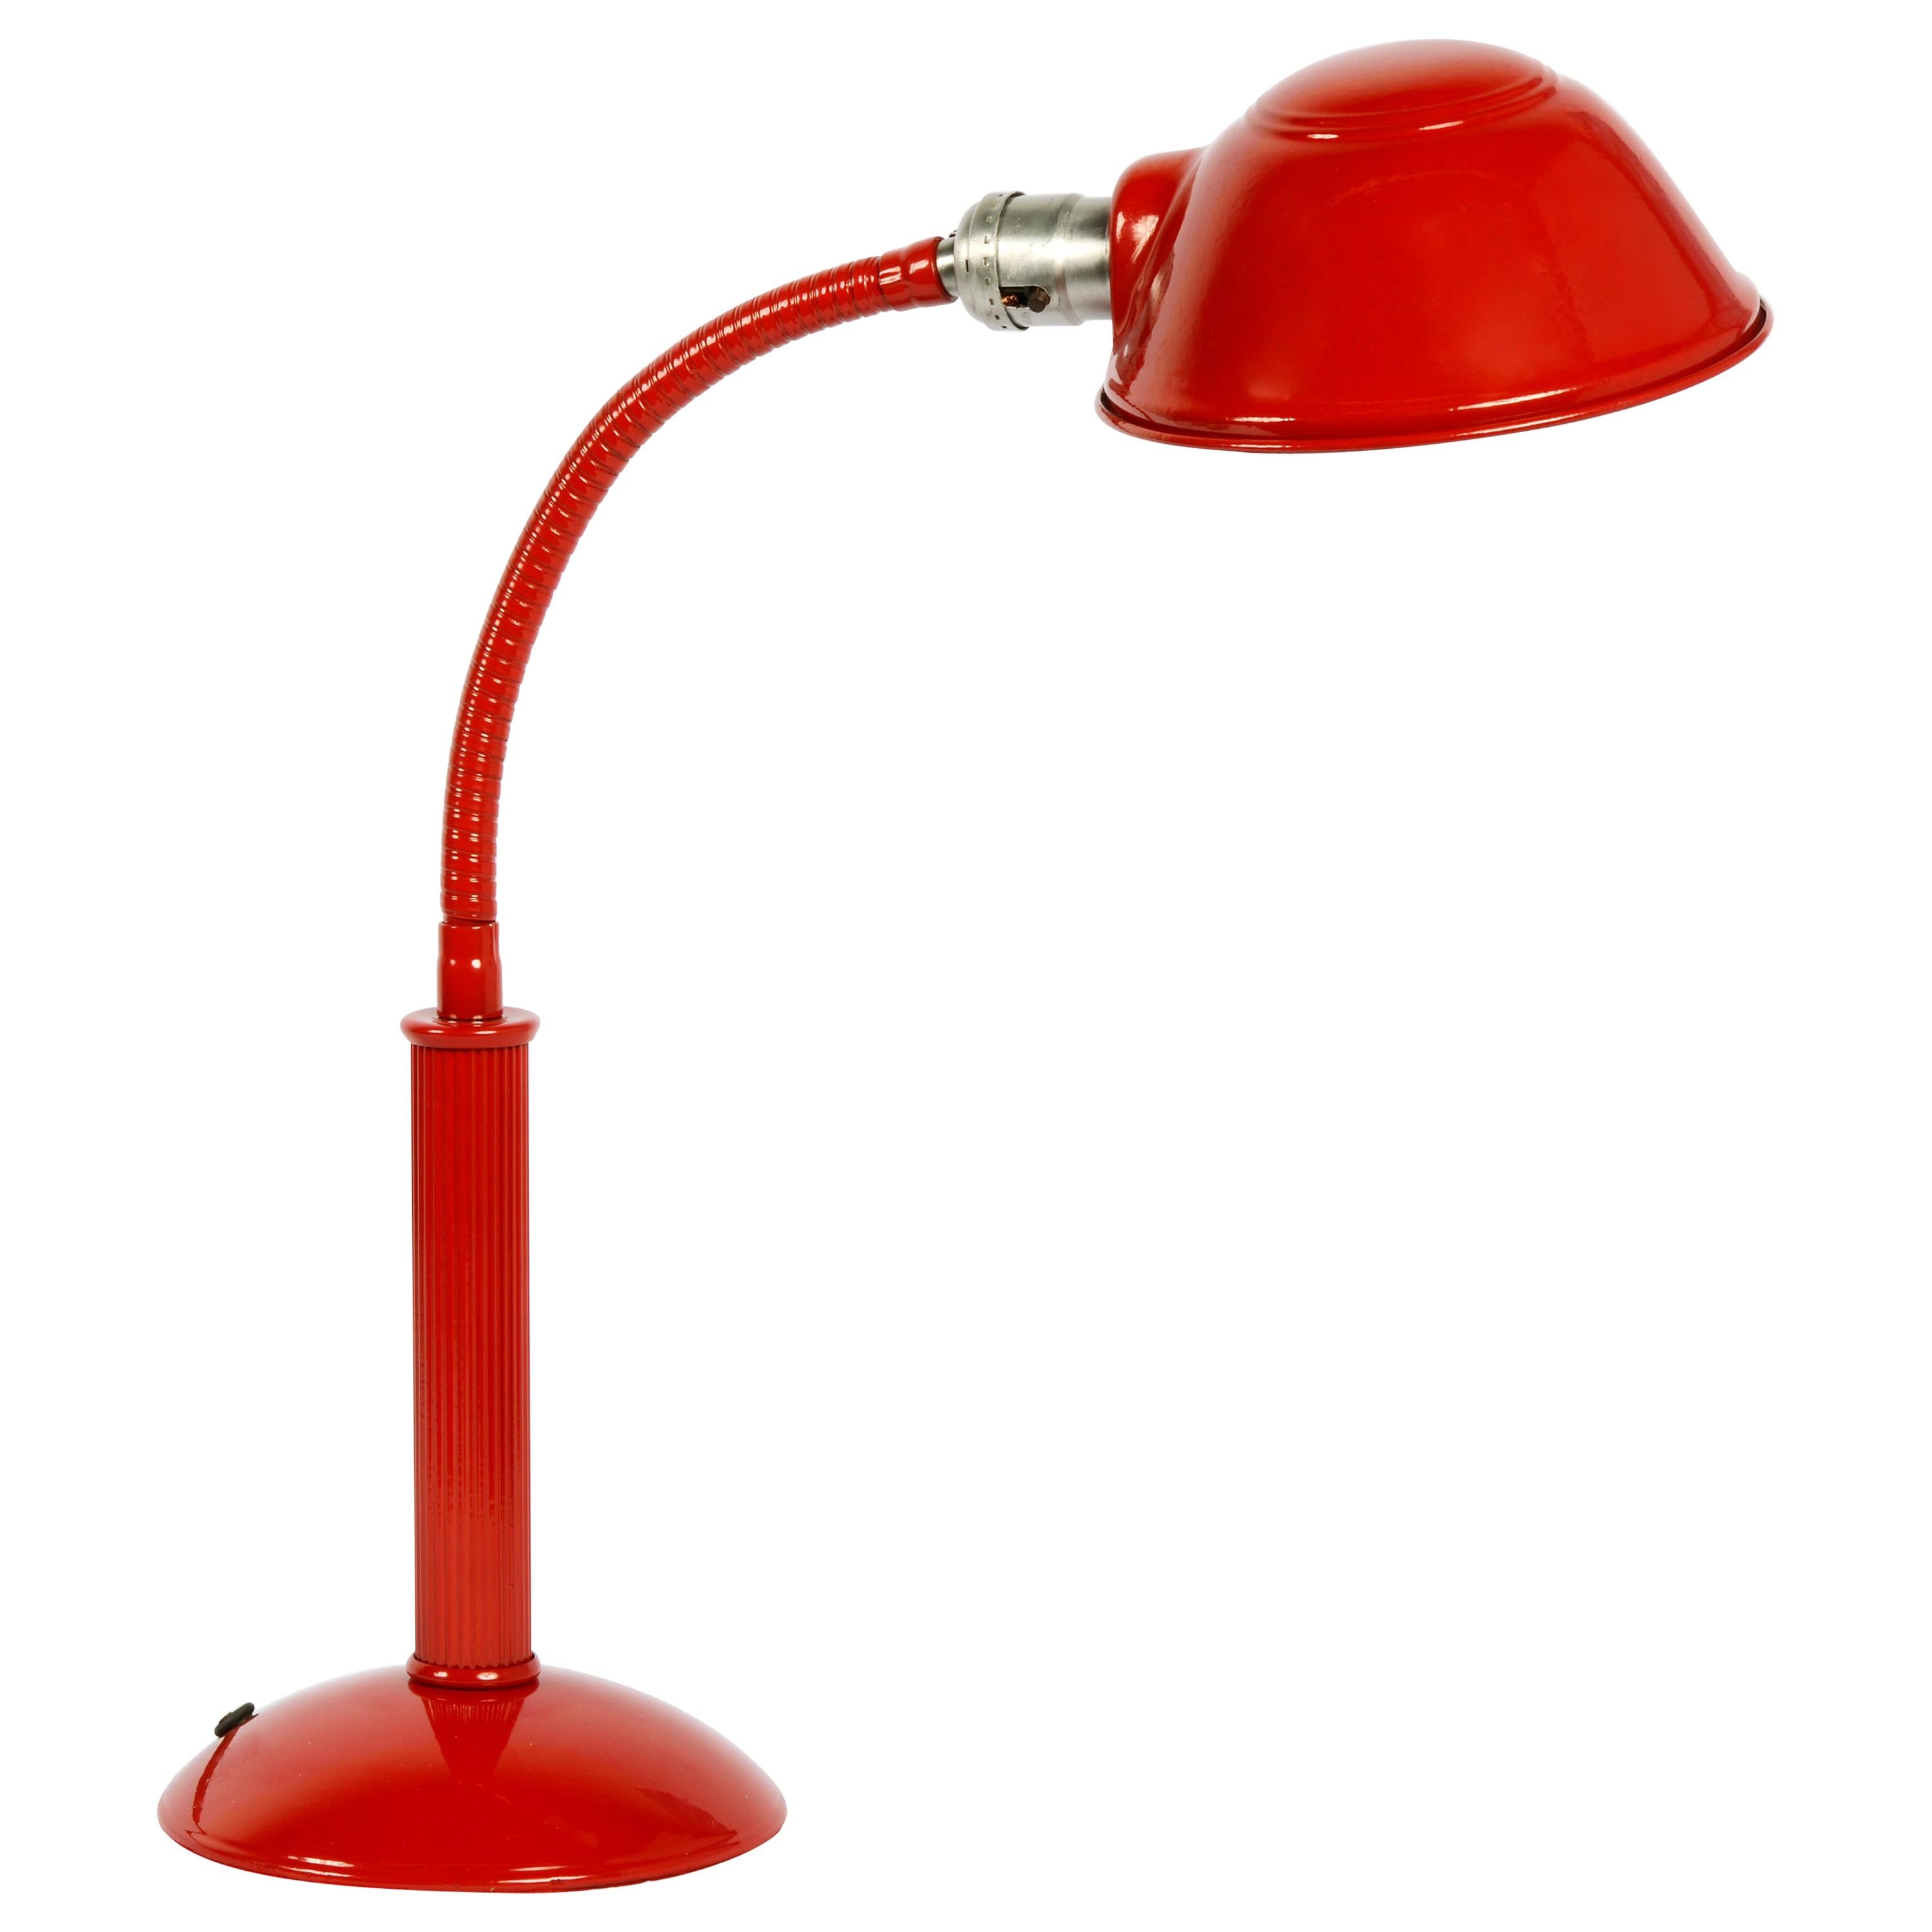 1960s Gooseneck Desk Lamp Refinished in Fire Engine Red